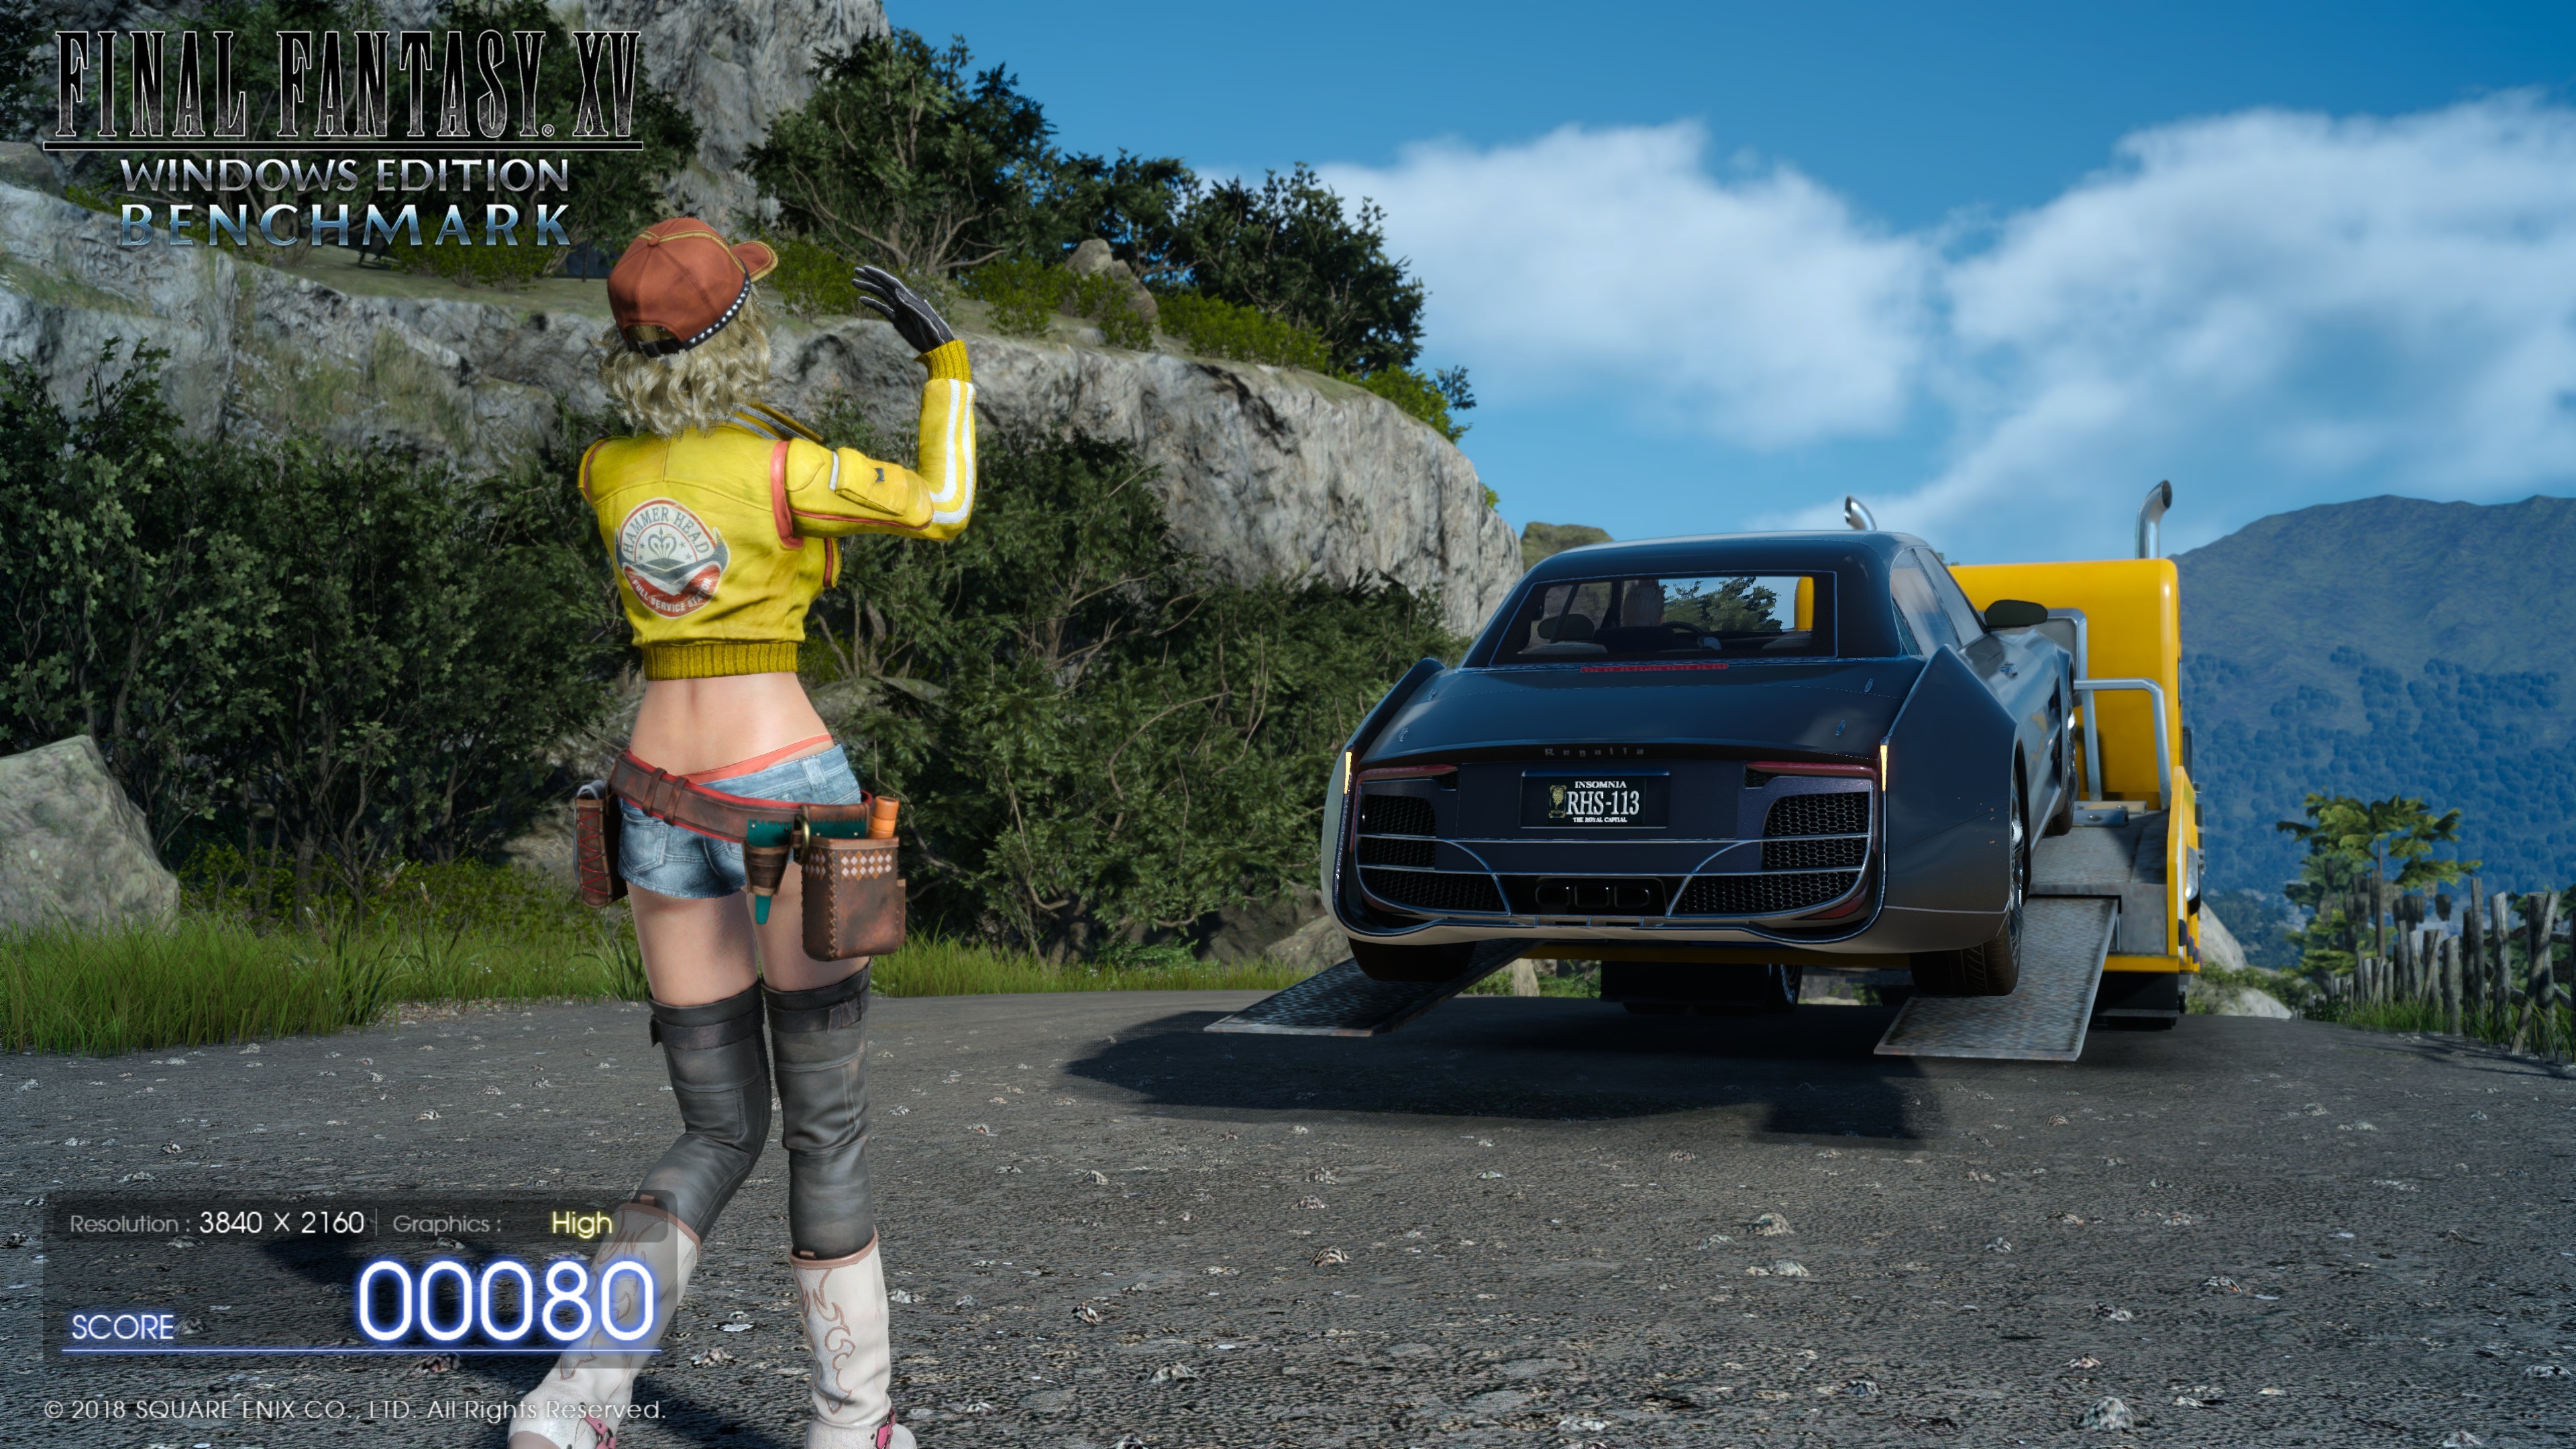 download the last version for iphoneFINAL FANTASY XV WINDOWS EDITION Playable Demo